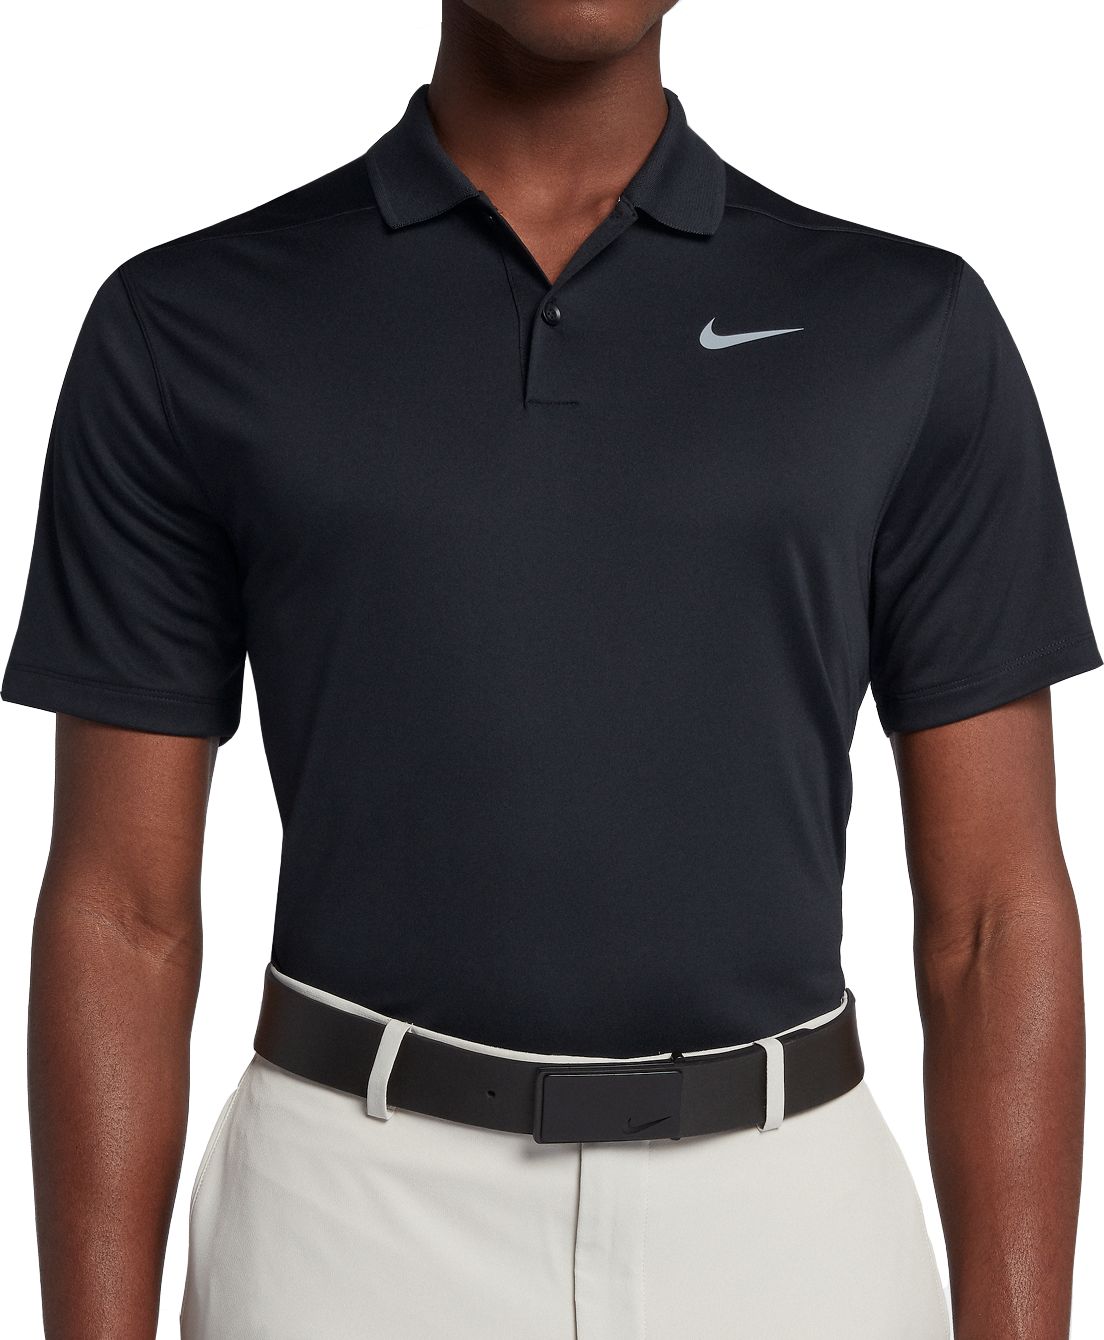 Nike Men's Solid Dry Victory Golf Polo | DICK'S Sporting Goods